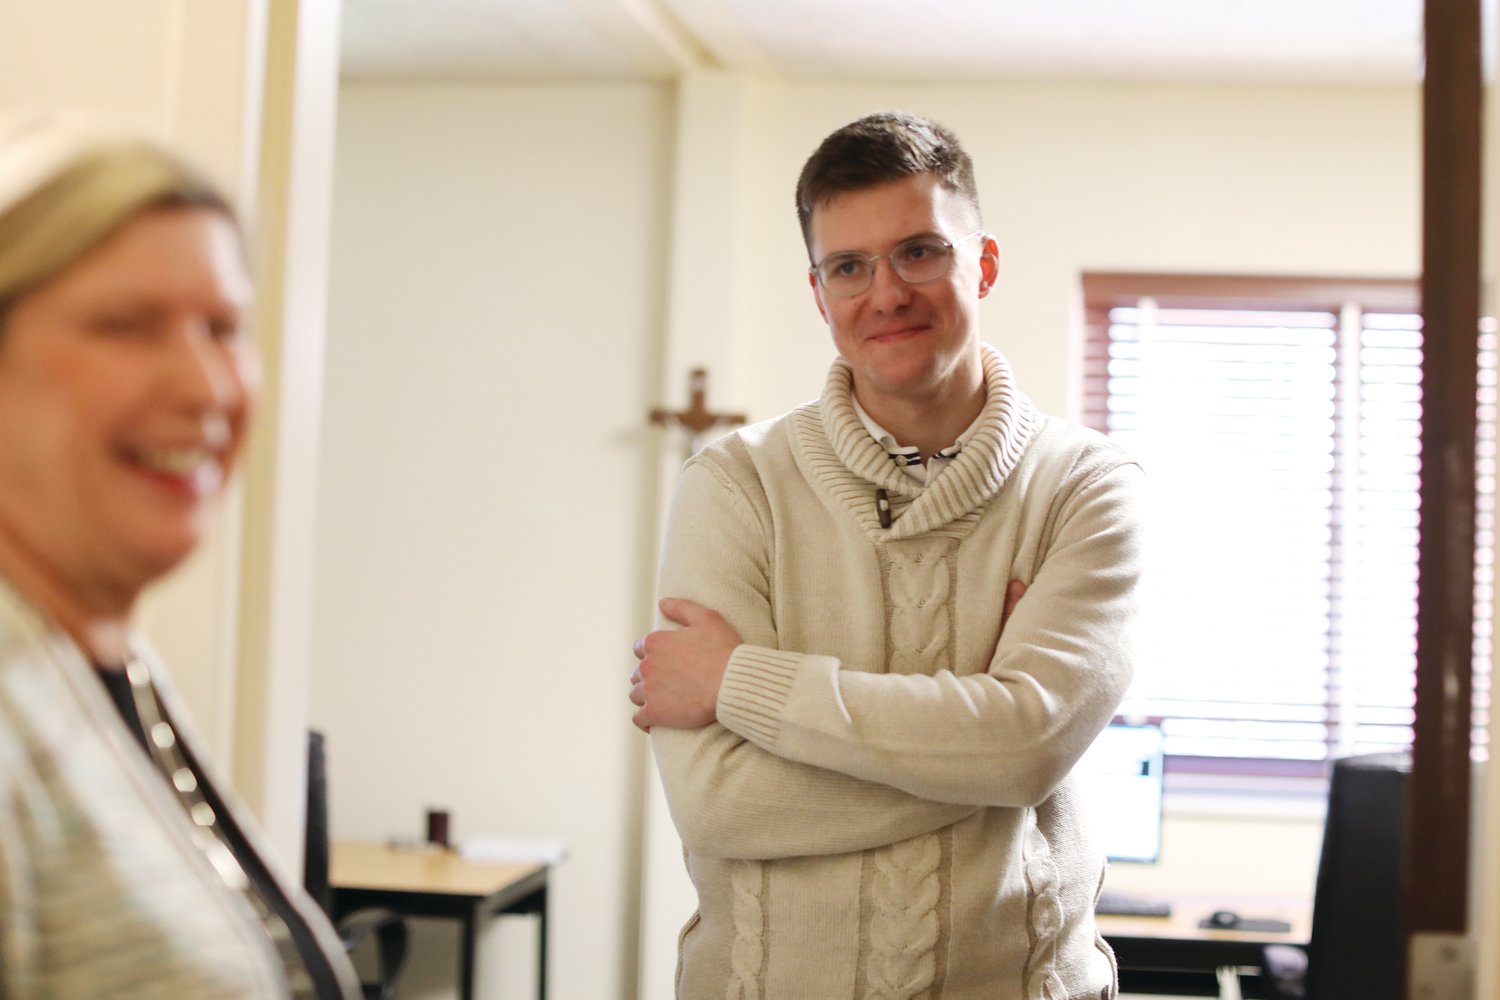 During her visit, Papitto had an opportunity to speak with local seminarian Mateusz Puzanowski.